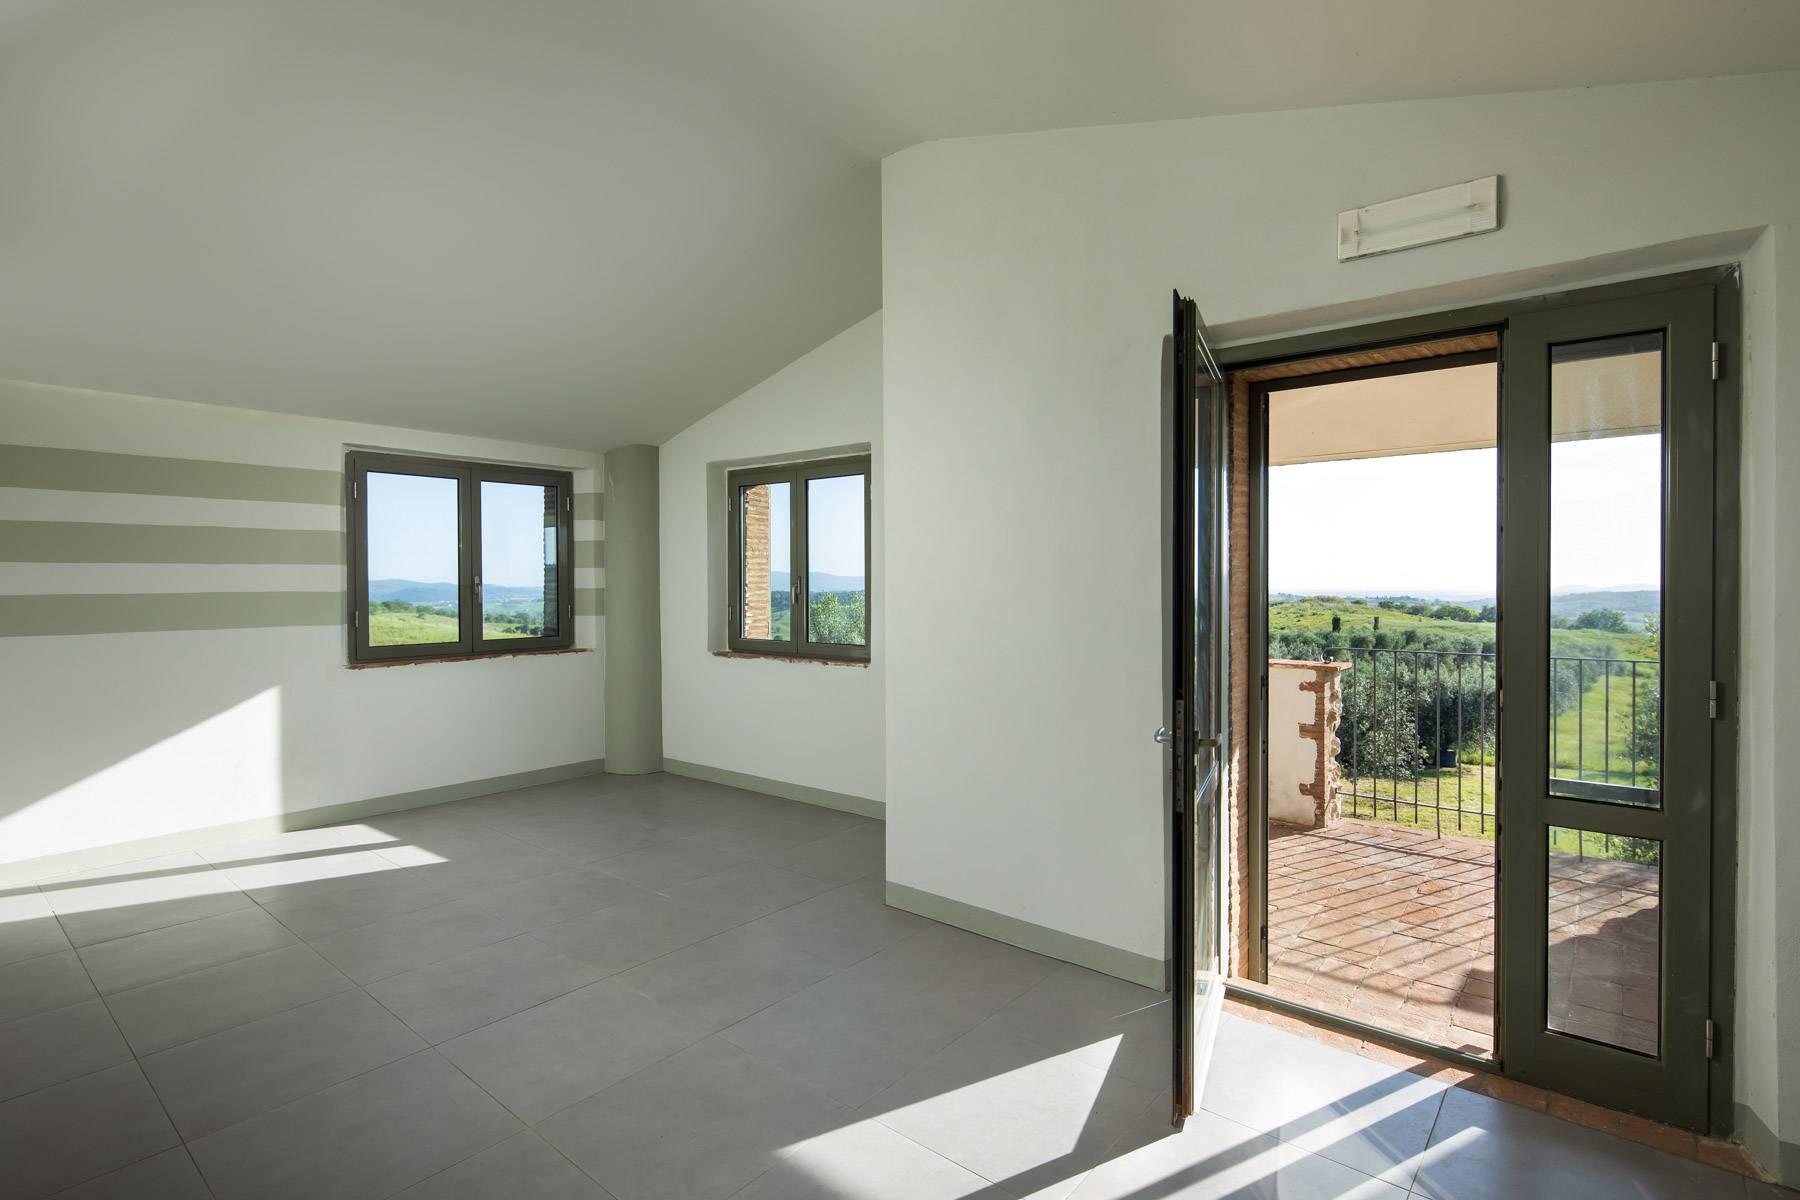 Top location overlooking Argentario and Giglio island - 23